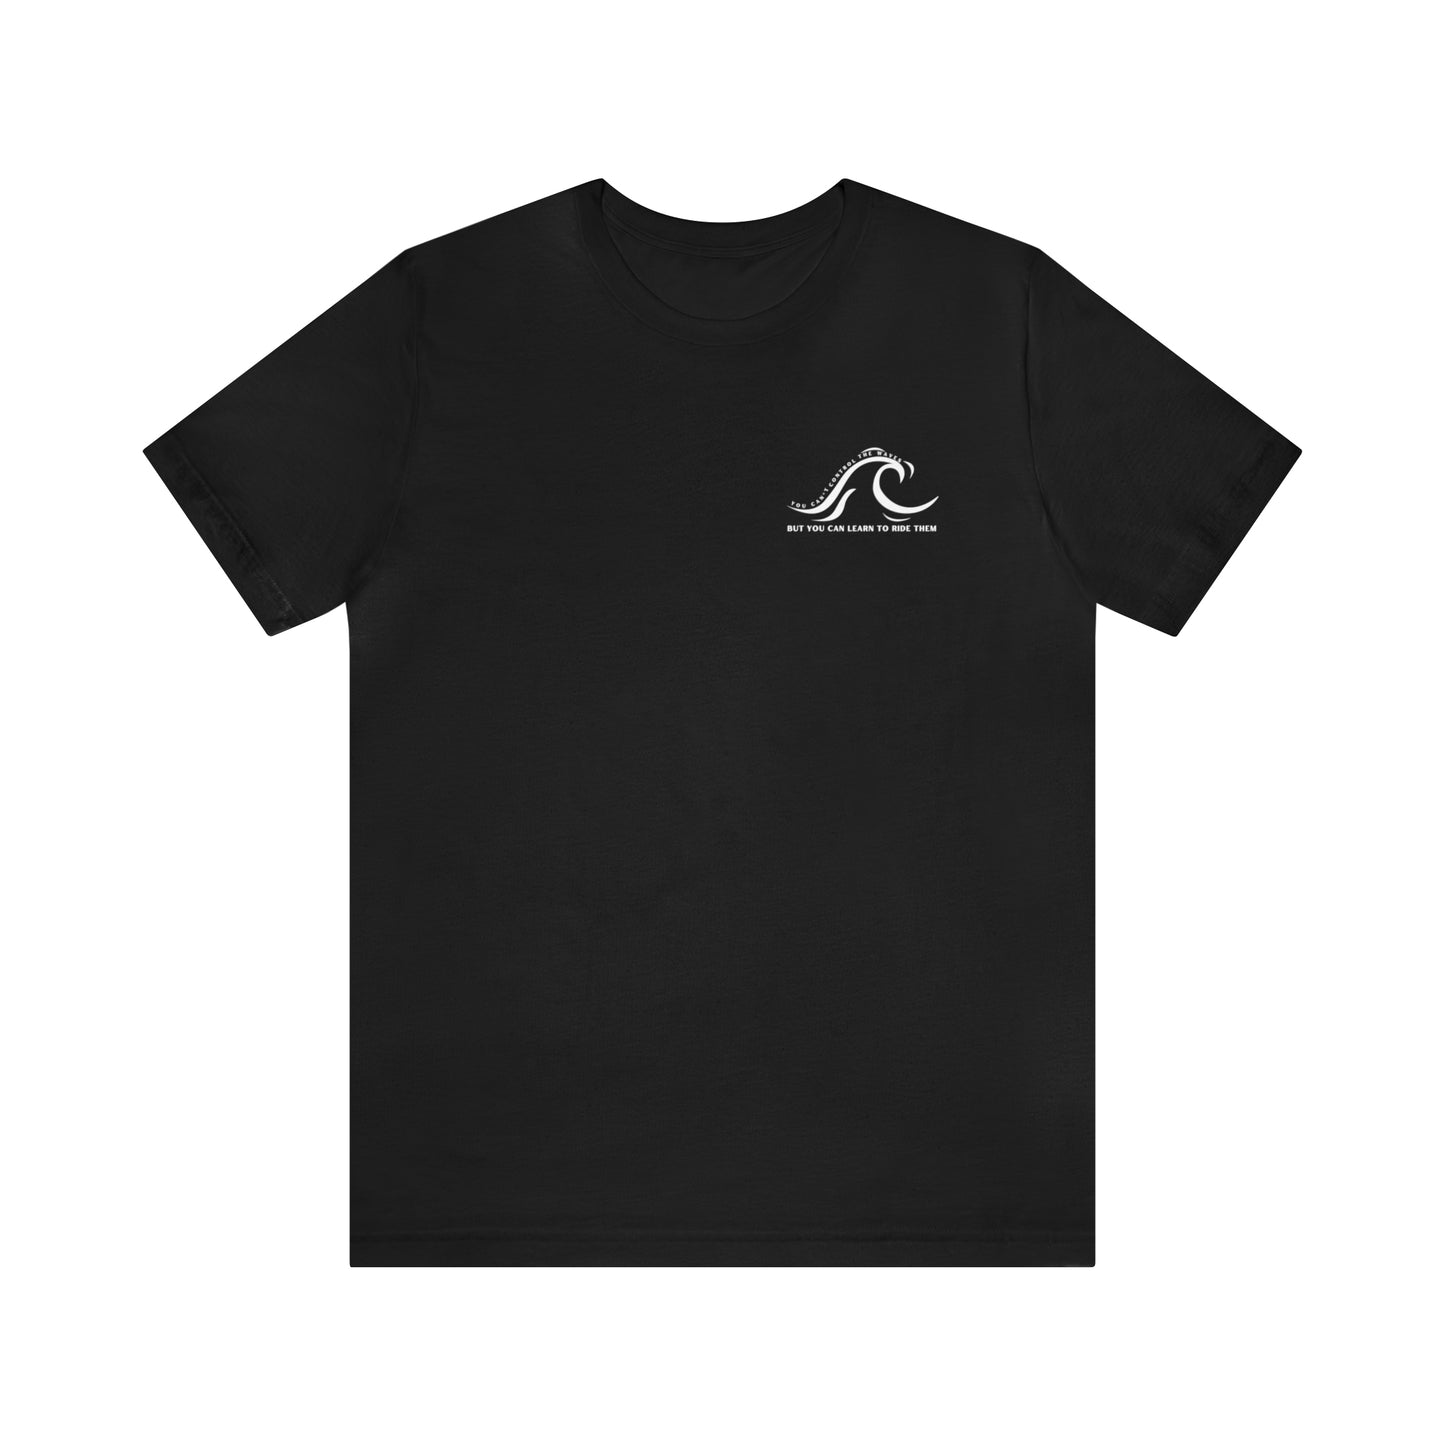 Ride the Waves Tee